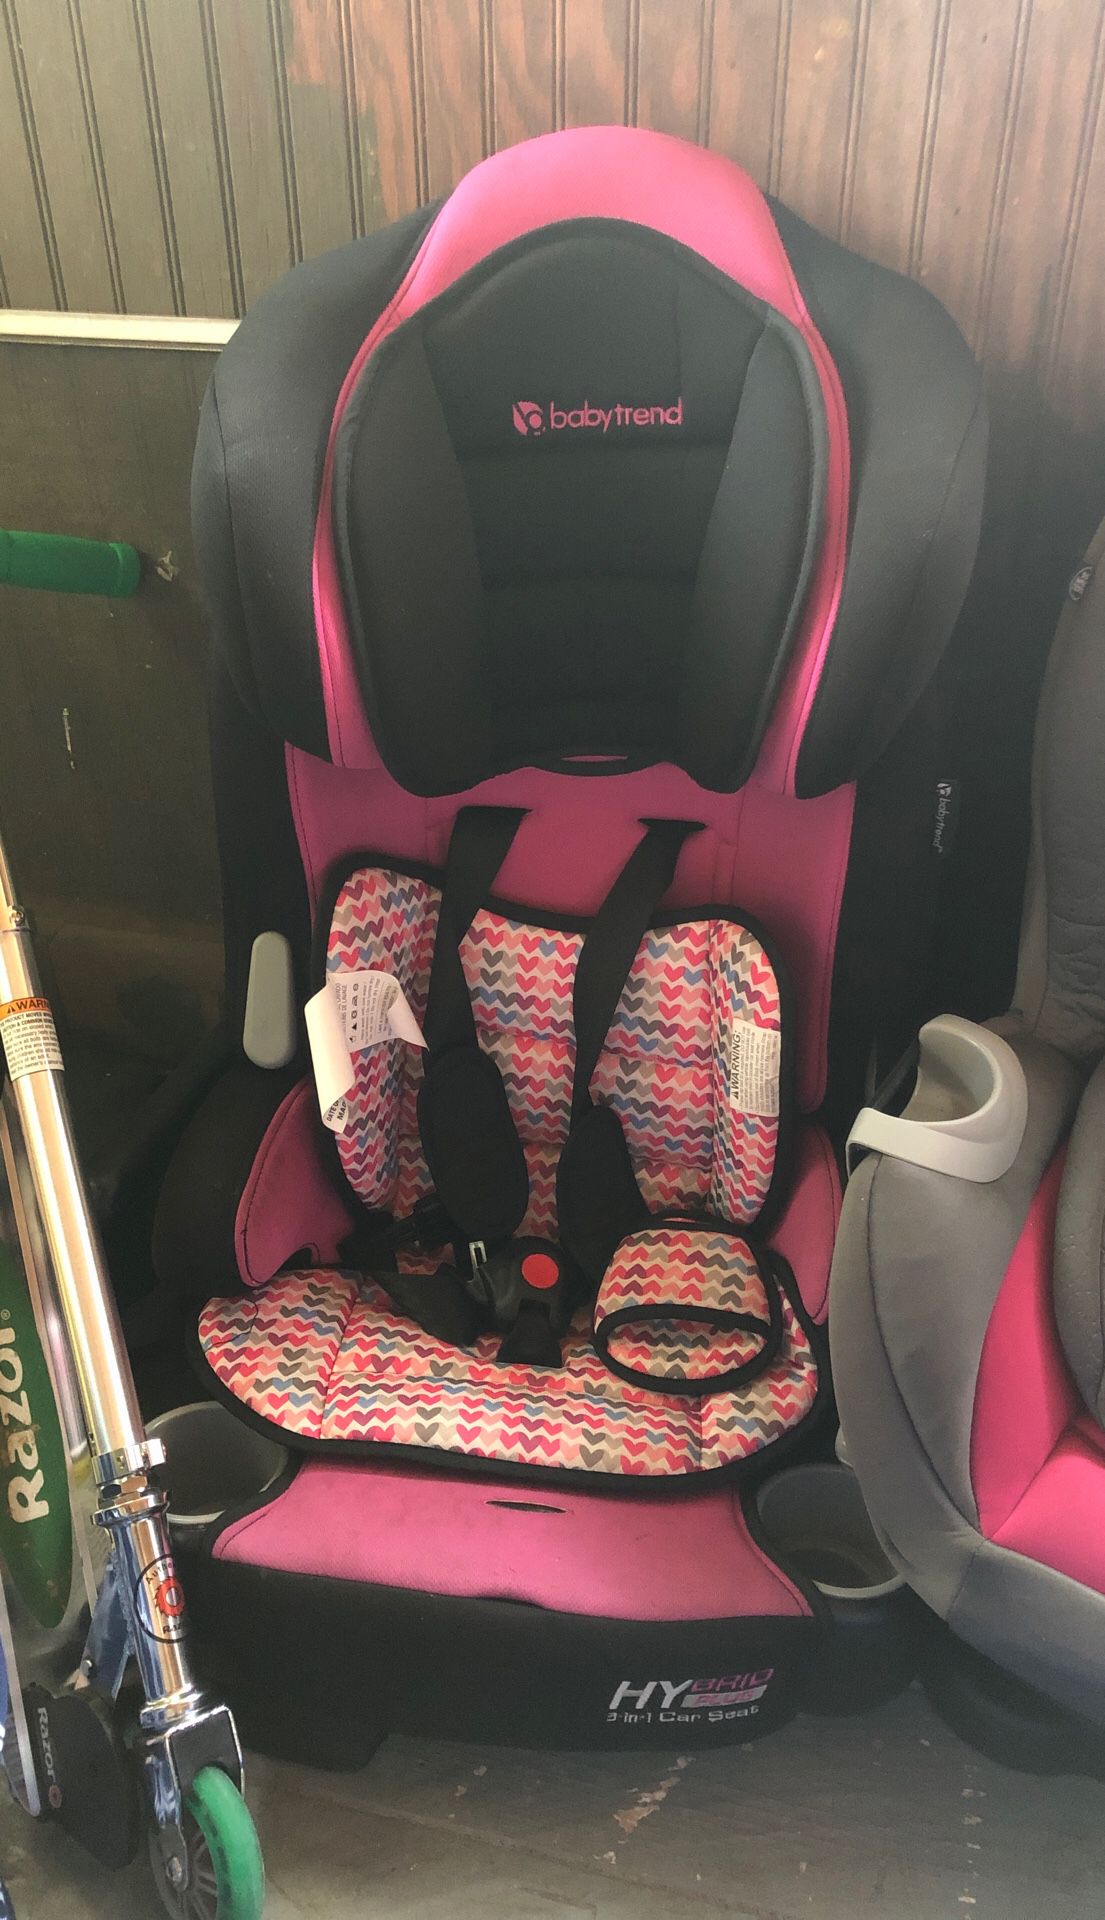 Baby trend booster/ car seat